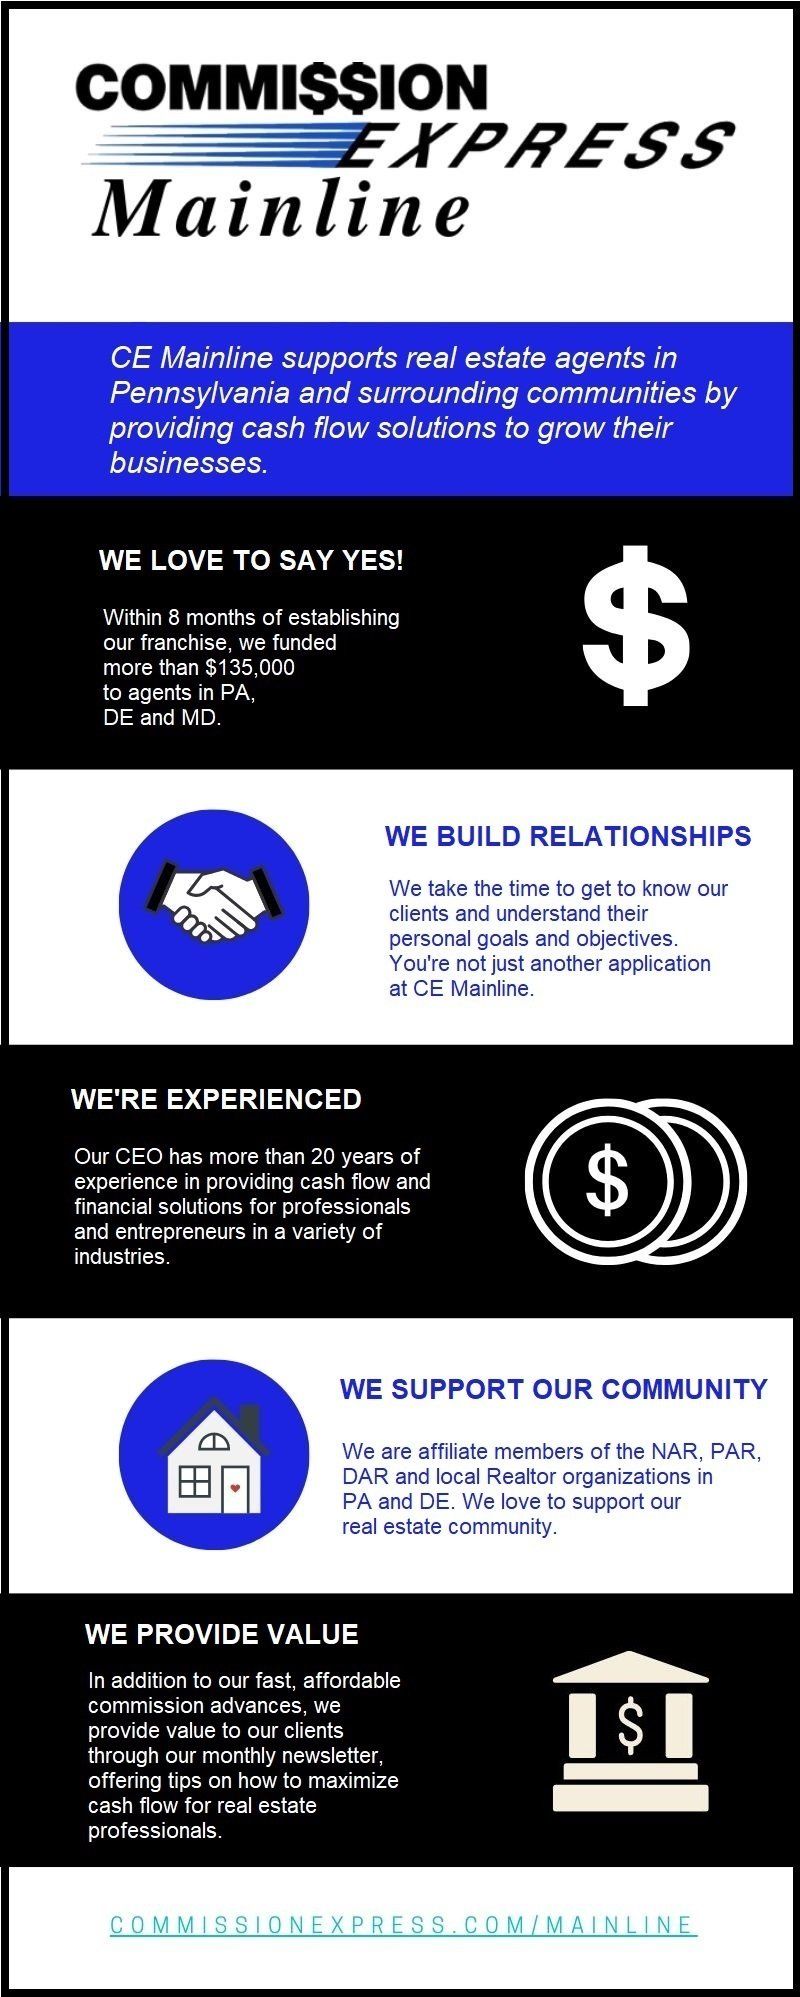 Commission Express Mainline Referral Program Infographic